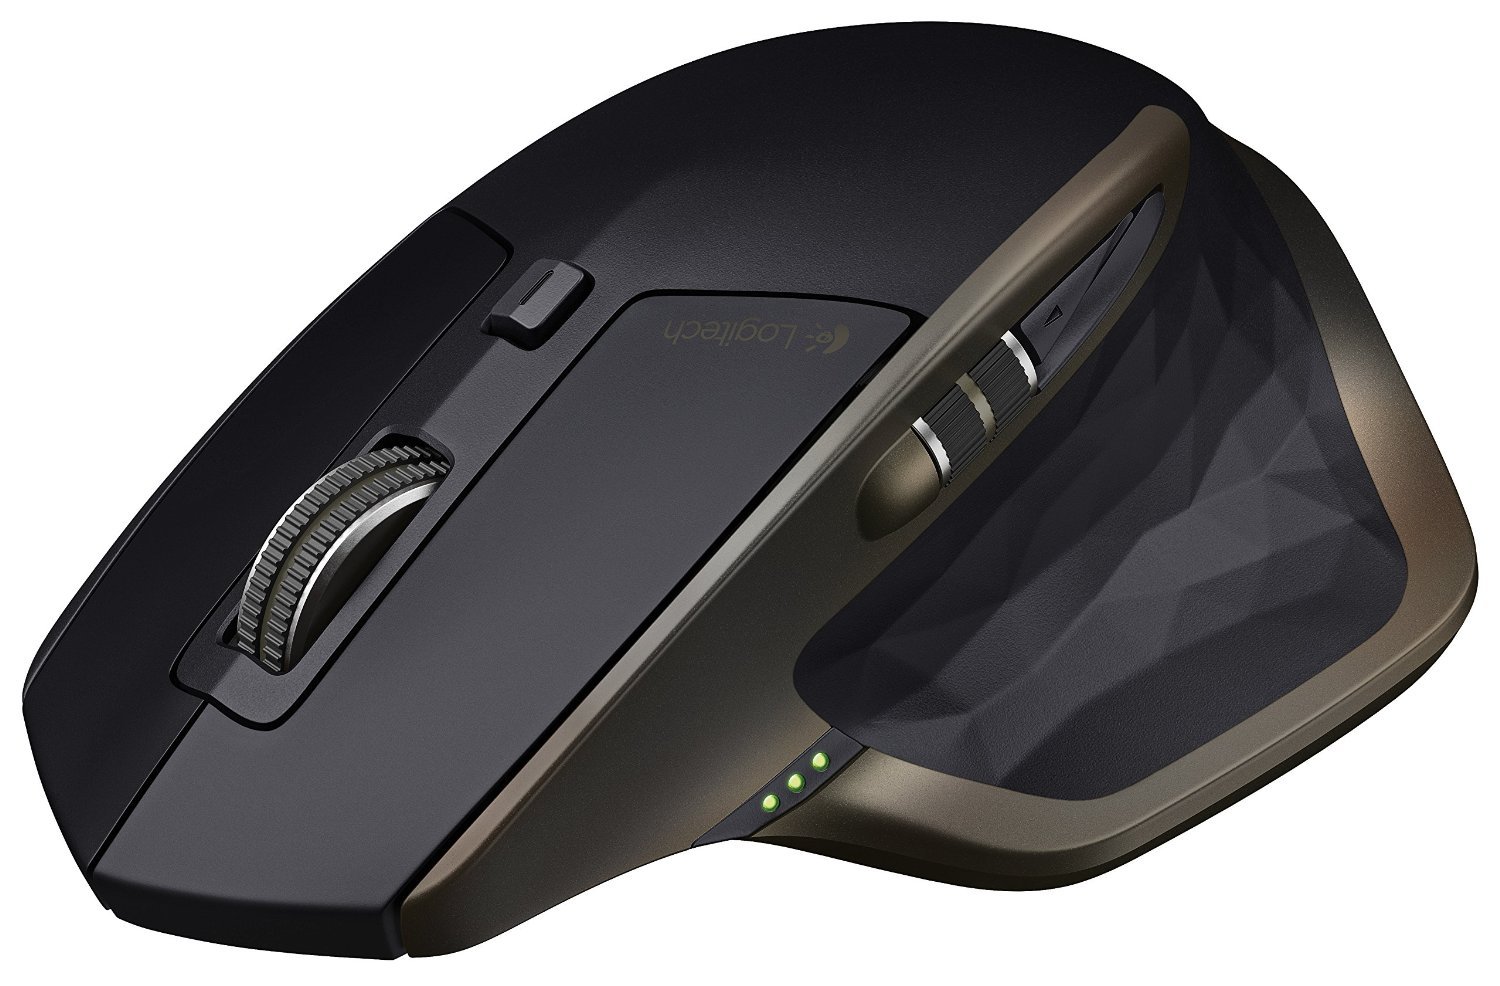 Deal: Get Up To 41% Off Logitech High-End Mice